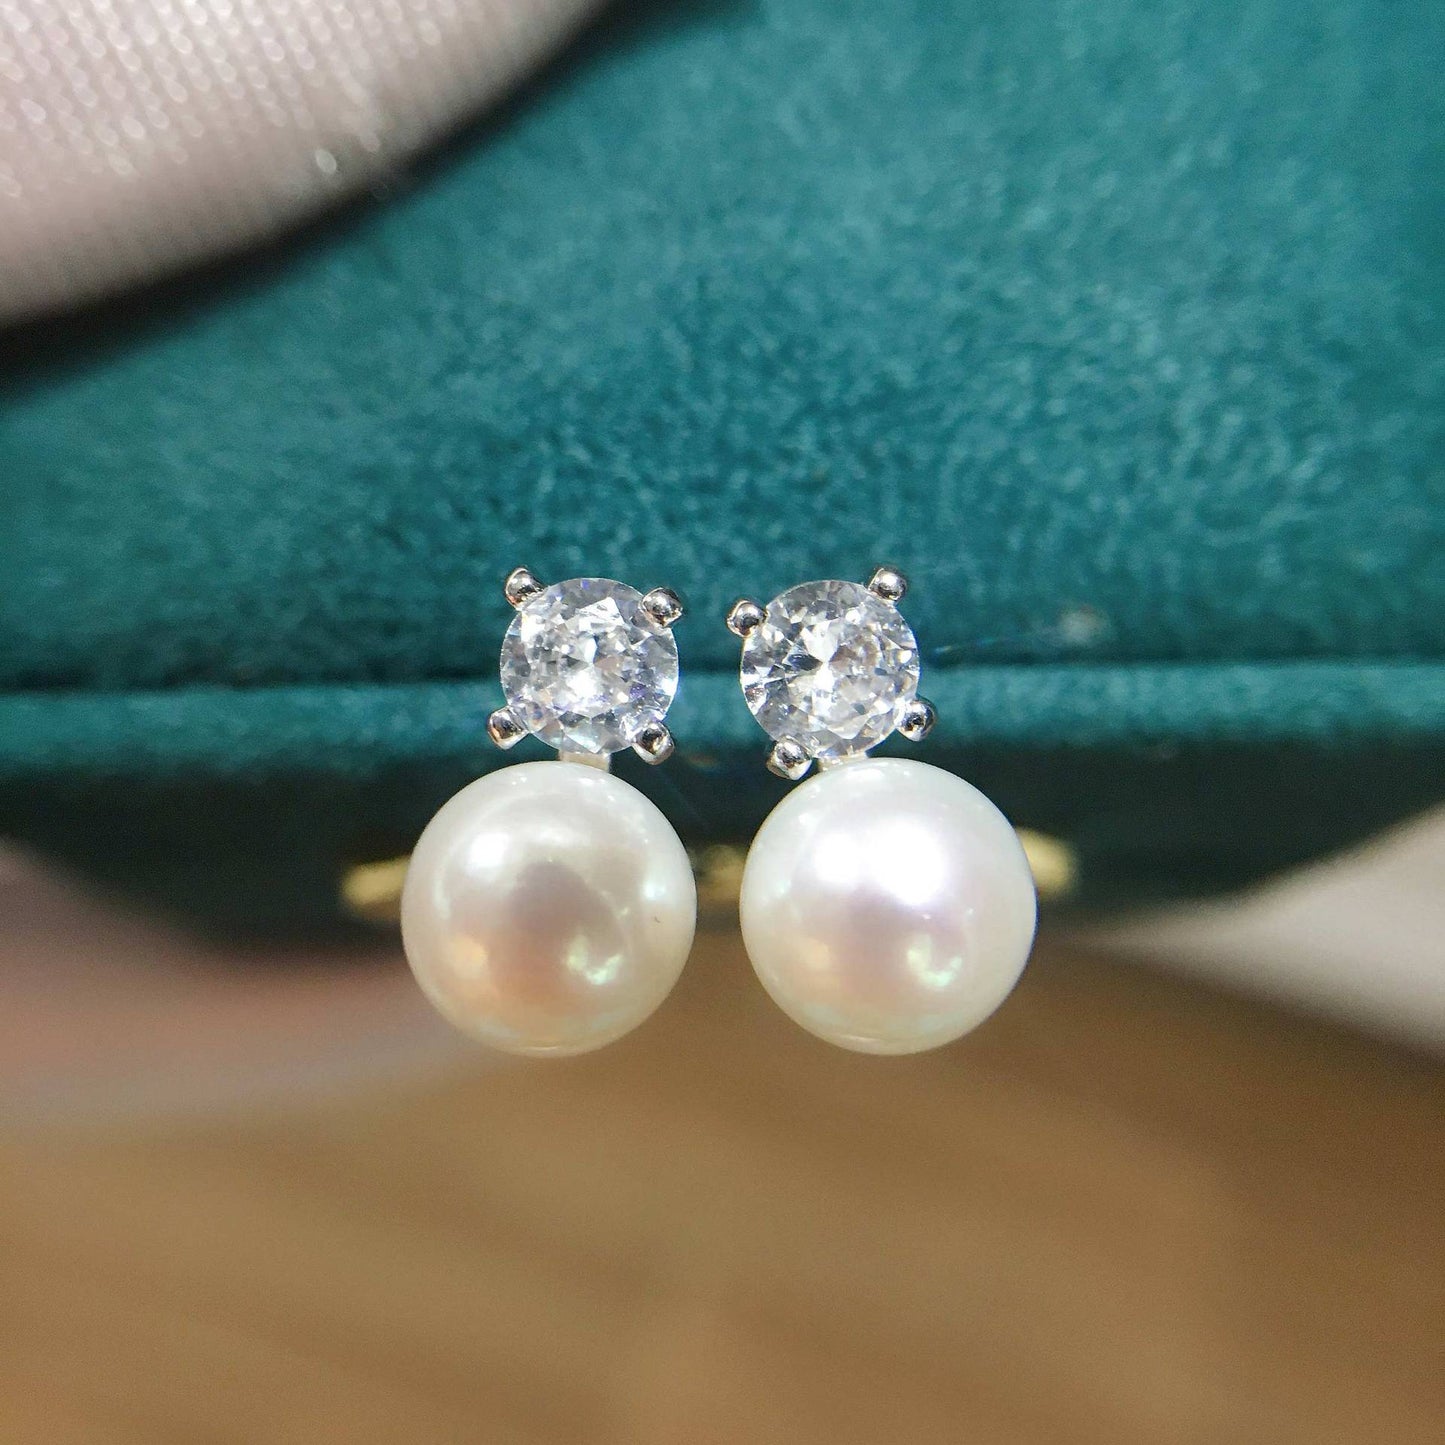 Tiny Pearl and Solitaire Earrings (925 Sterling Silver)